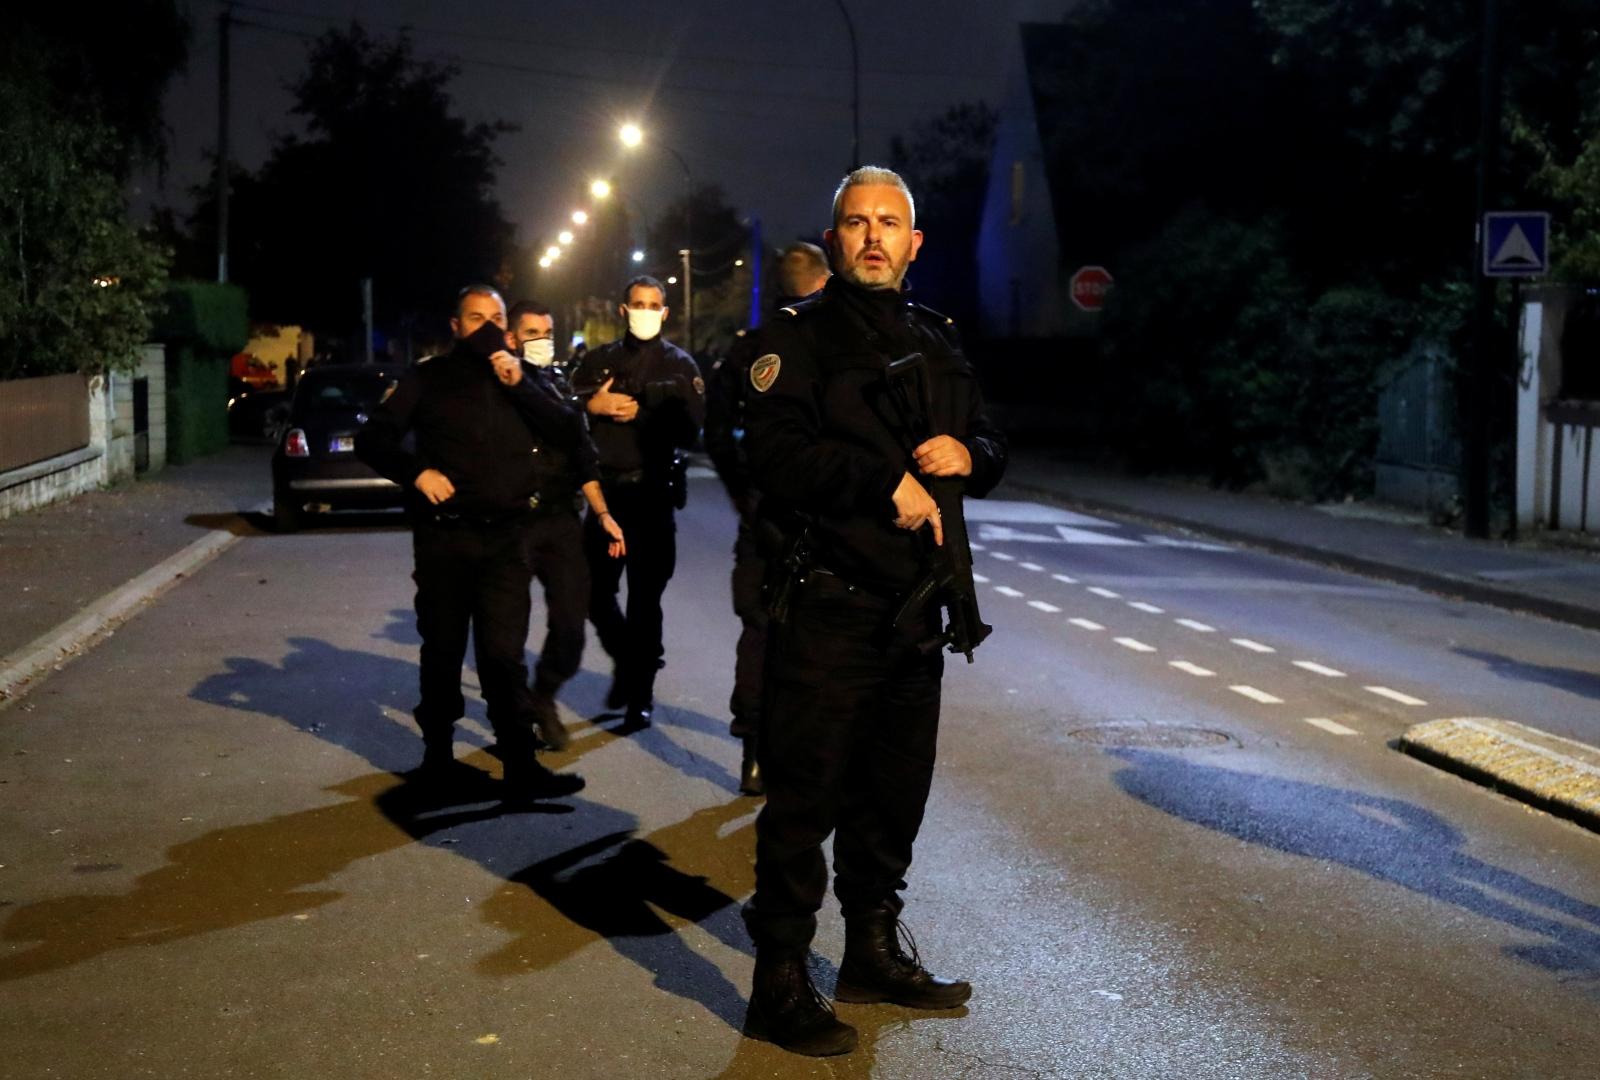 Stabbing attack in the Paris suburb of Conflans St Honorine Police officers secure the area near the scene of a stabbing attack in the Paris suburb of Conflans St Honorine, France, October 16, 2020. REUTERS/Charles Platiau CHARLES PLATIAU